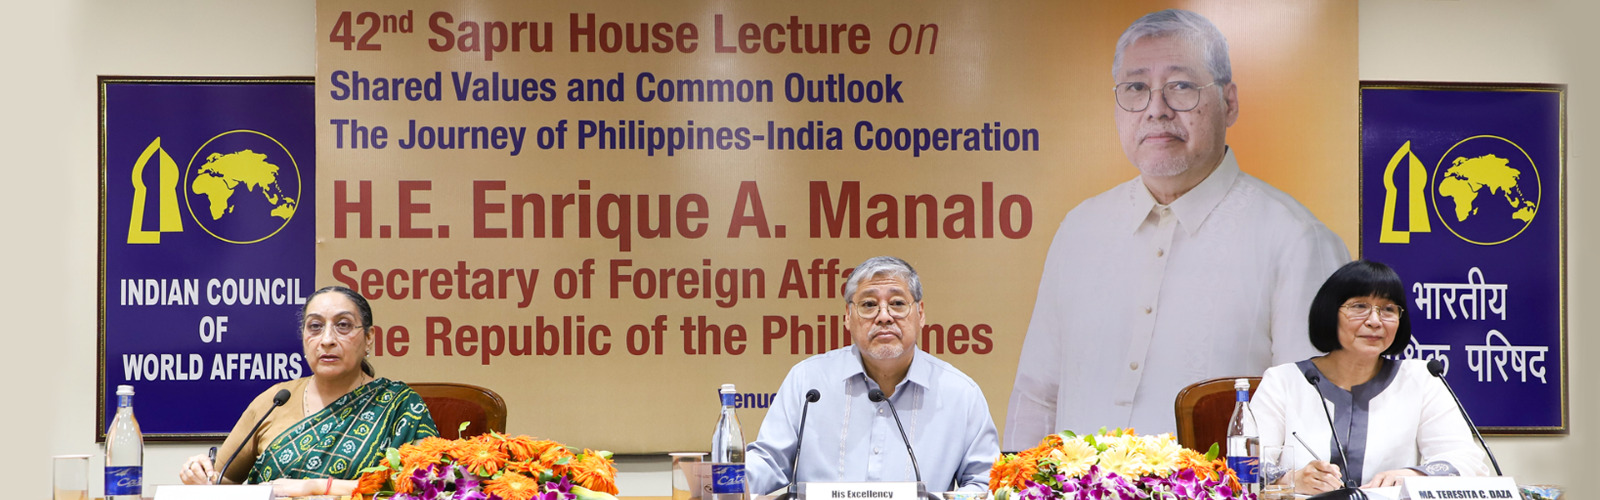 L-R: Amb. Vijay Thakur Singh, DG, ICWA; H.E. Enrique A. Manalo, Secretary of Foreign Affairs, The Republic of the Philippines; Amb. Ma. Teresita C. Daza, DG, FSI & Former Amb. of Philippines to India & Nepal at the 42nd Sapru House Lecture on Shared Values and Common Outlook - The Journey of Philippines-India Cooperation by Hon. Enrique A. Manalo, Secretary of Foreign Affairs, The Republic of the Philippines organized at Sapru House on 28 June 2023.